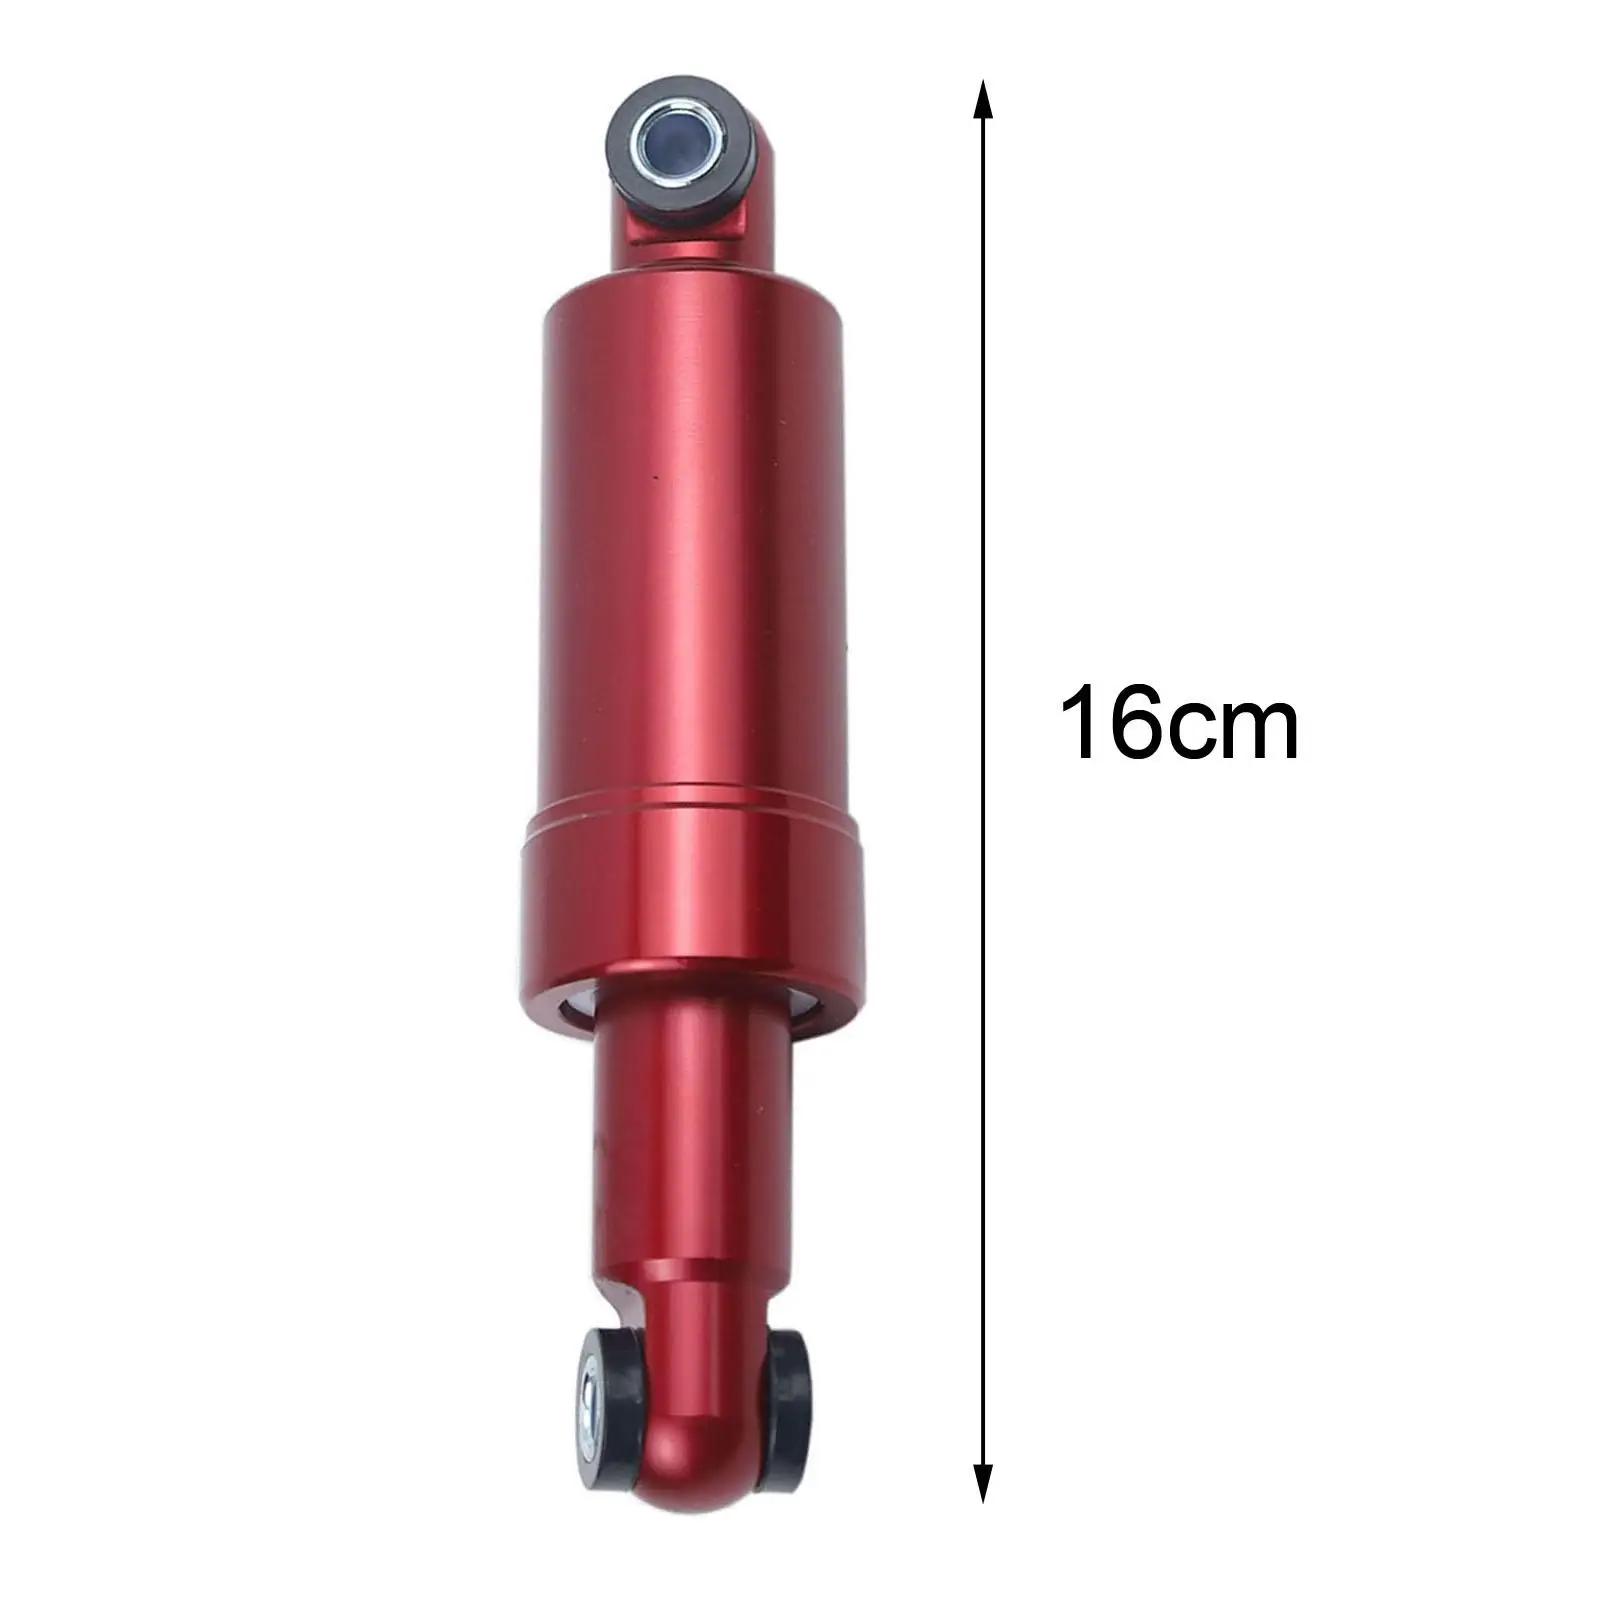 Bike Rear Suspension Shock Absorber Replace for Folding Scooter Part